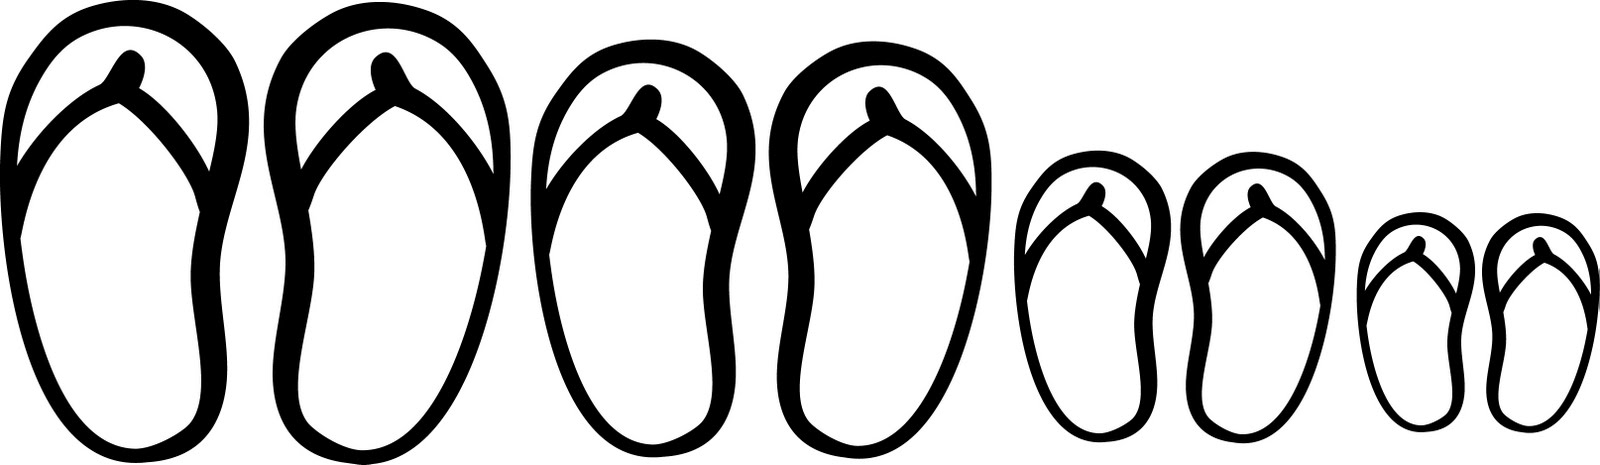 Flip Flops Clipart Black And White | Clipart Panda - Free Clipart ...